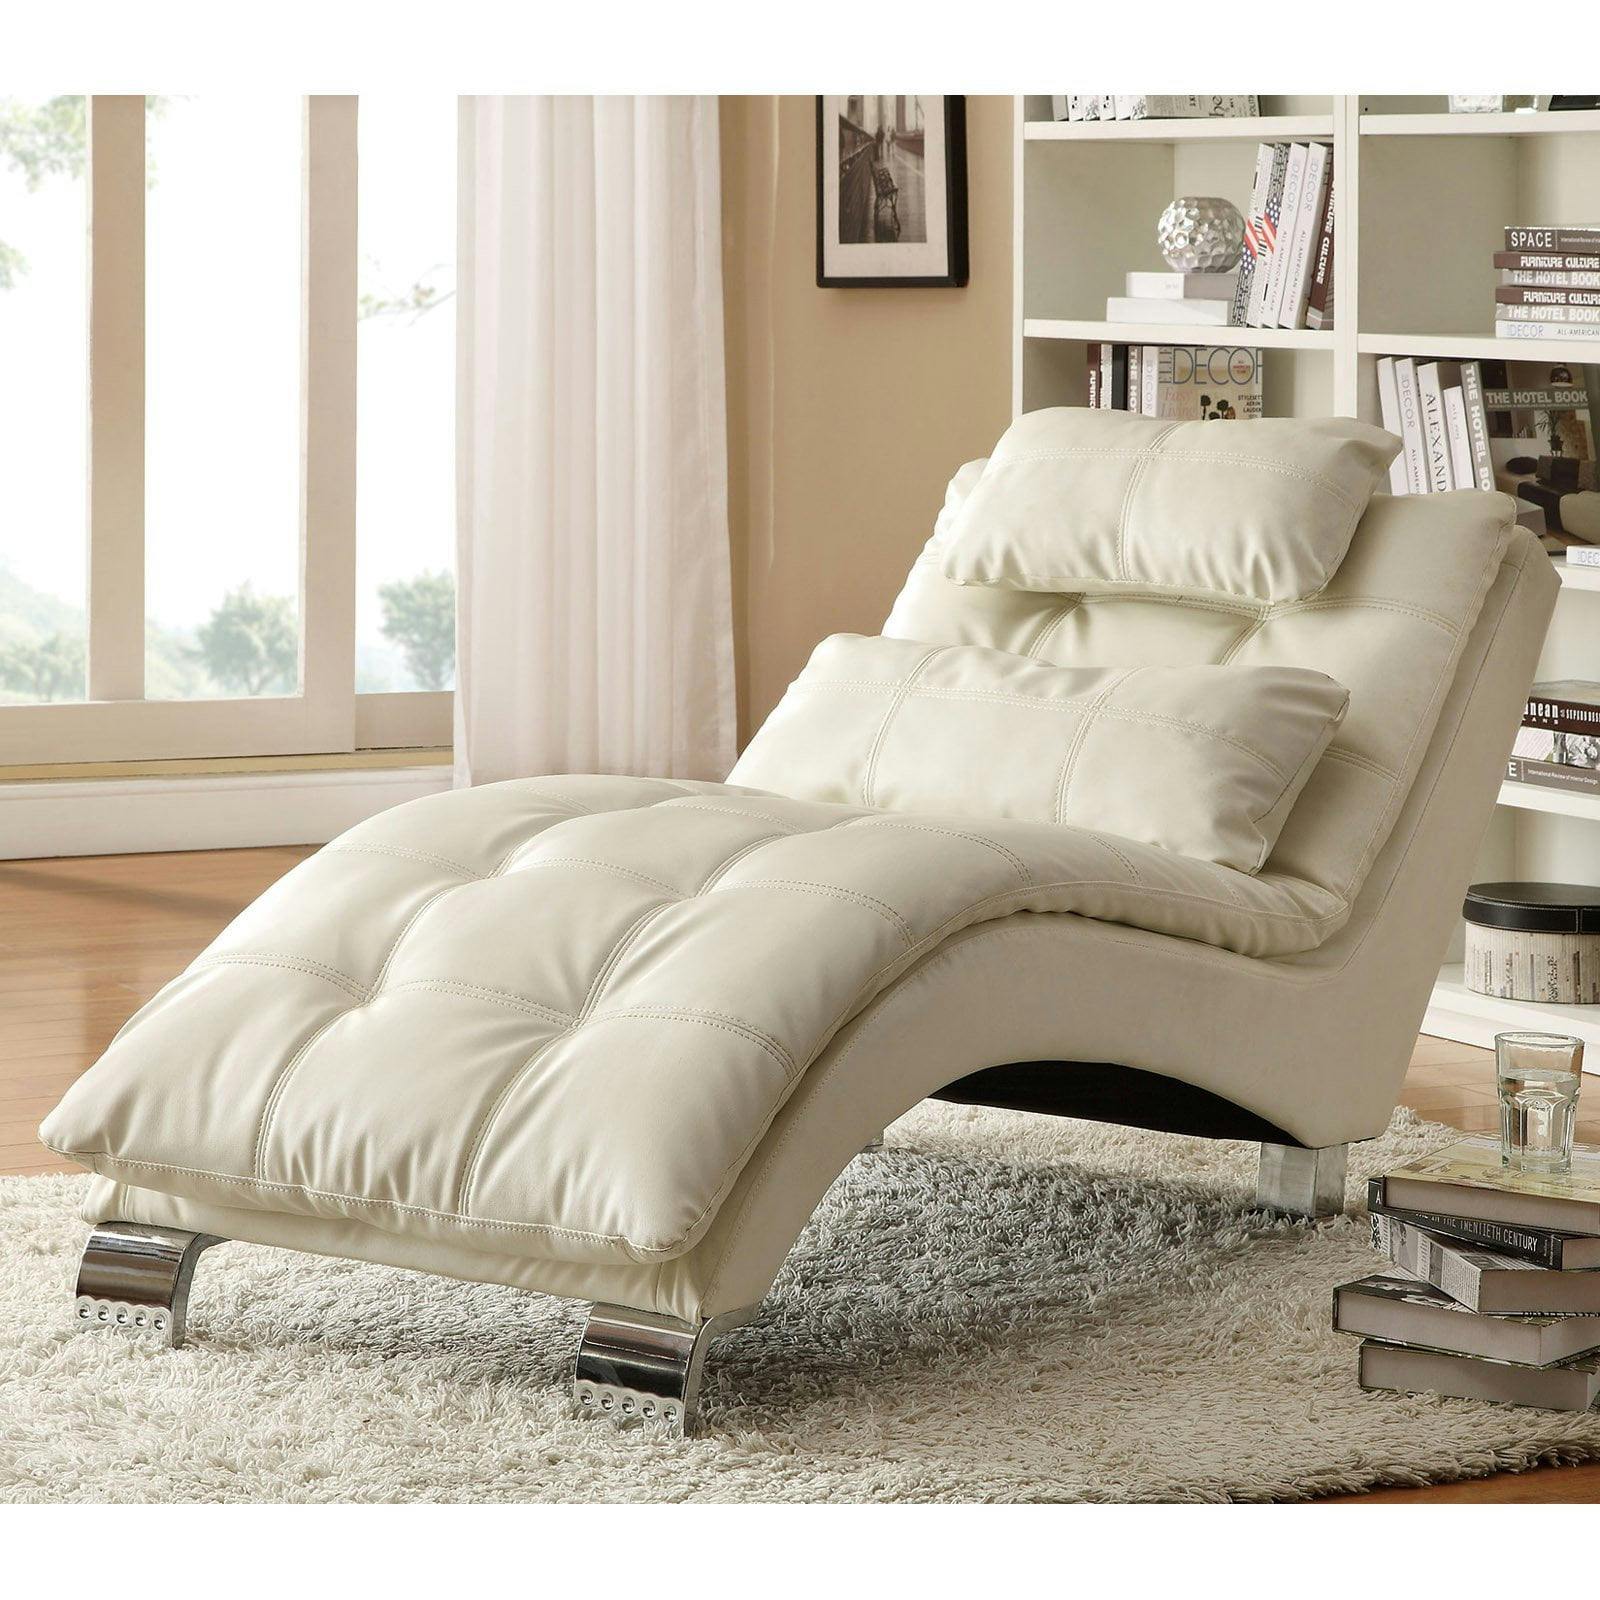 Transitional White Faux Leather Chaise with Chrome Legs